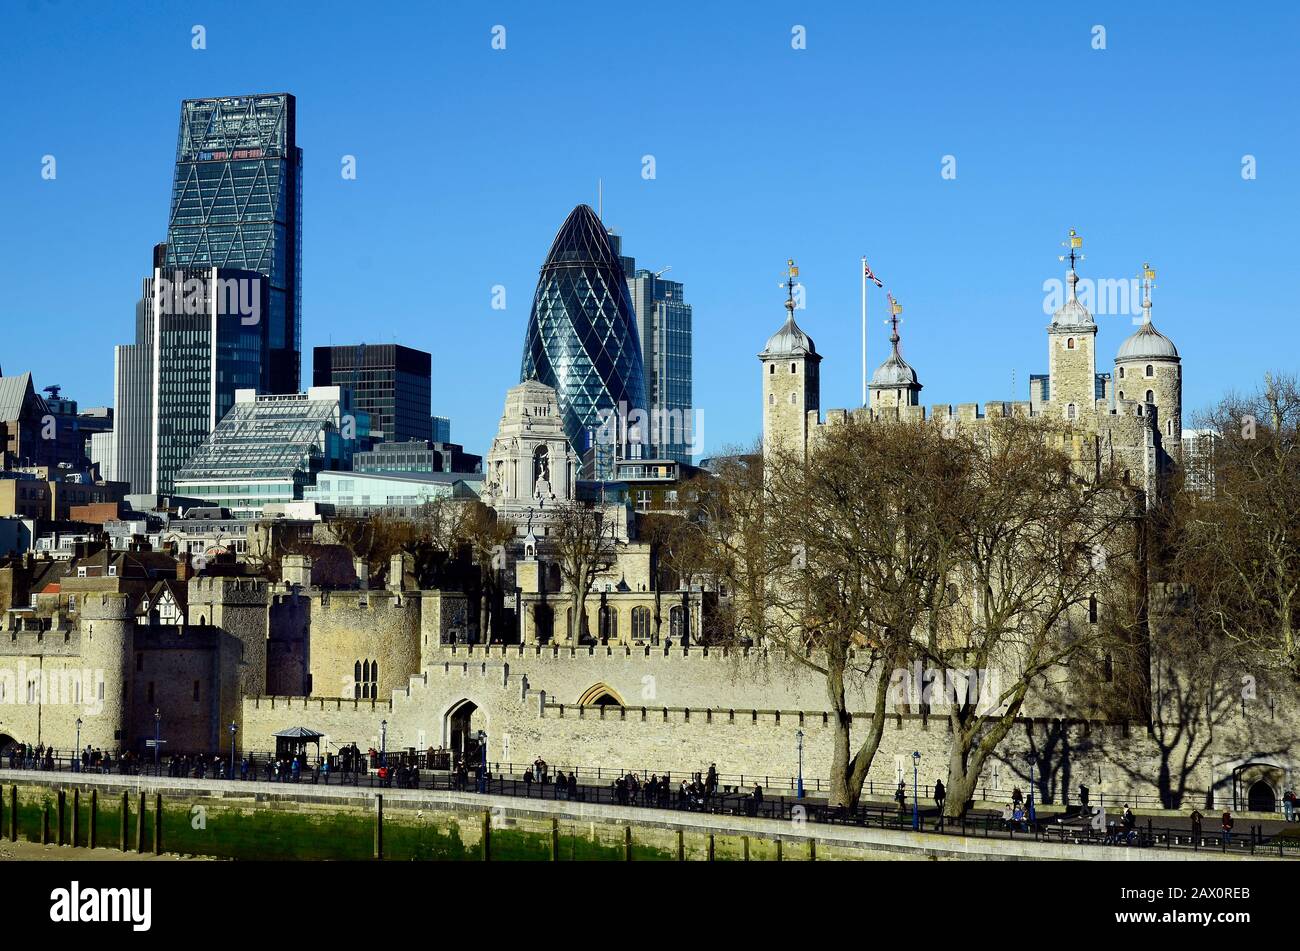 London, United Kingdom - January 15th 2016: Unidentified people and Tower of London with The Gherkin and Leadenhall building aka Cheese Grater behind Stock Photo